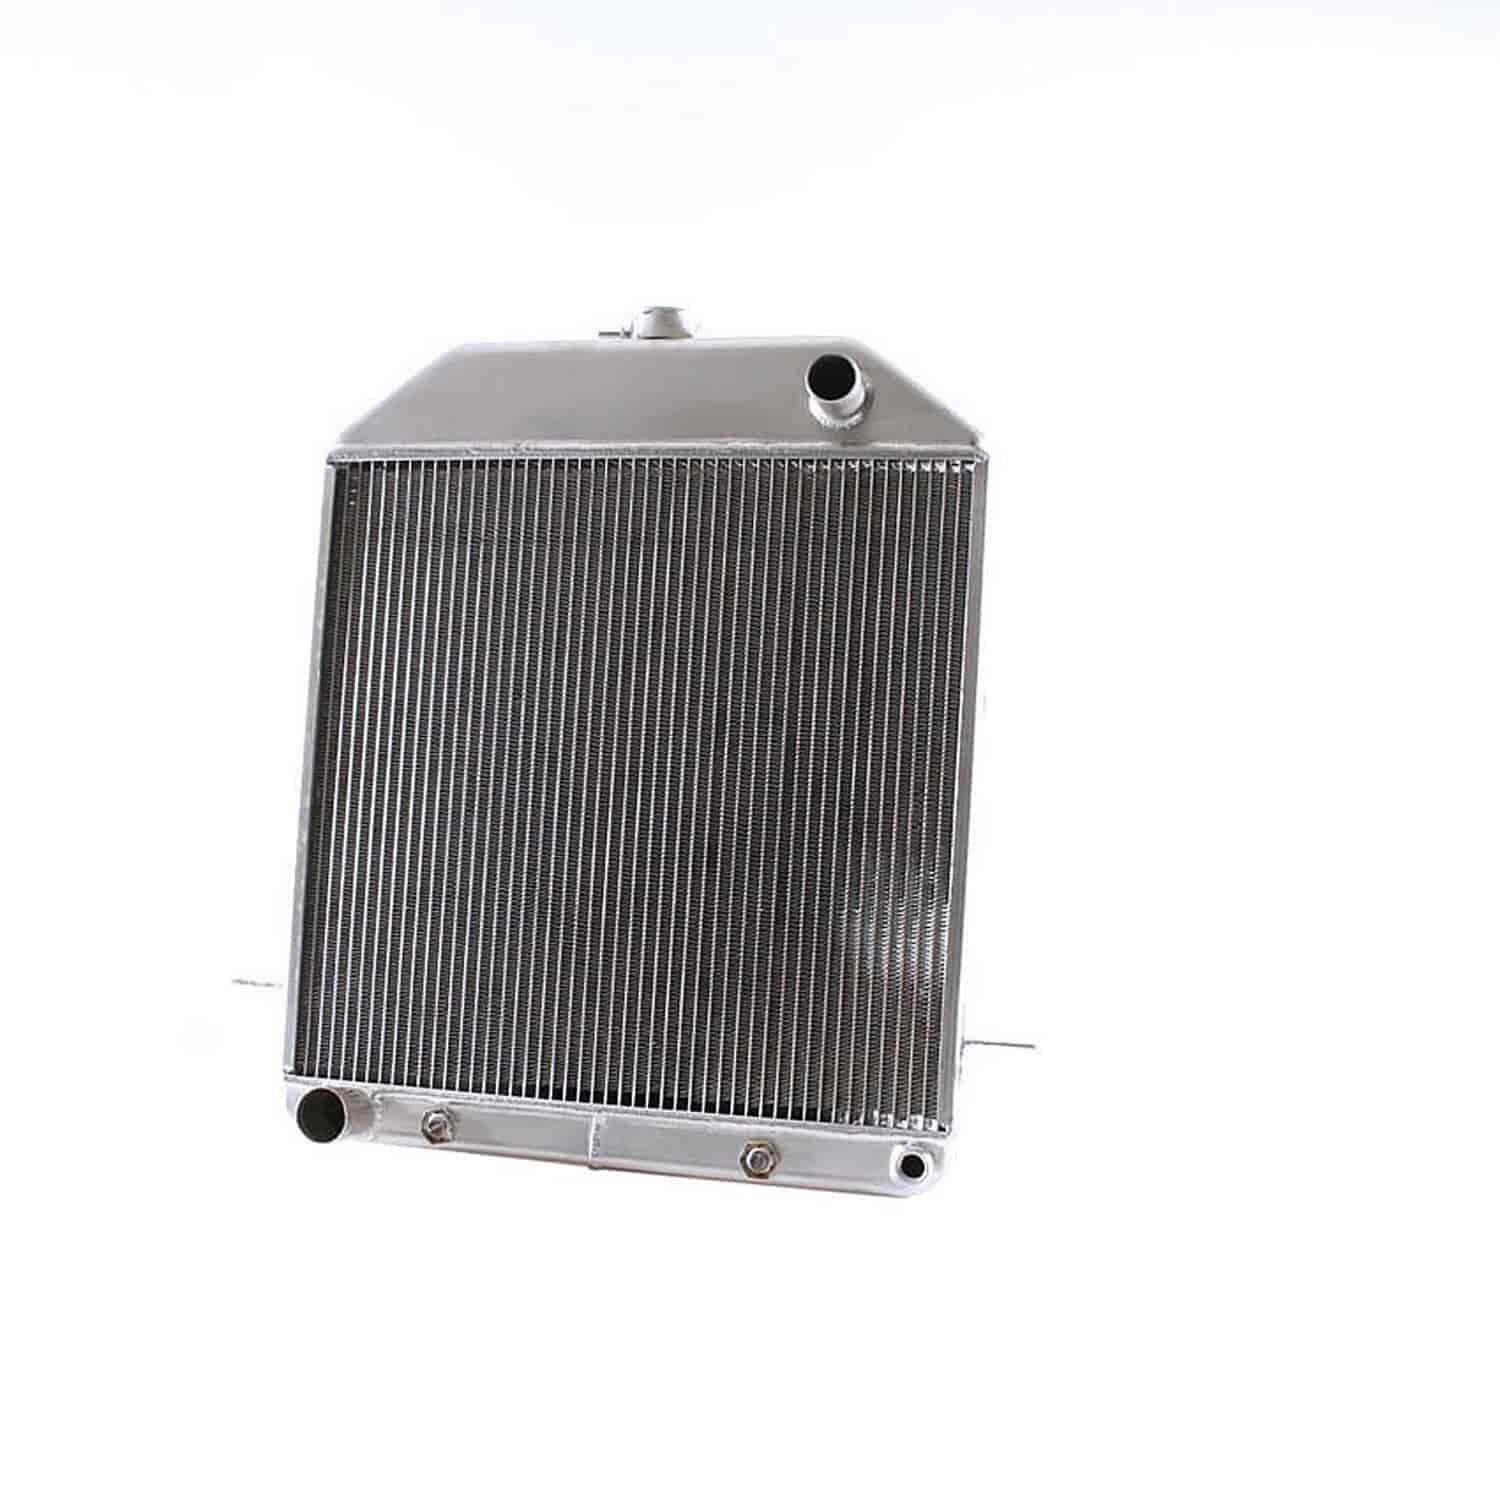 ExactFit Radiator for 1939-1940 Ford Deluxe with Late Ford Small Block & Big Block